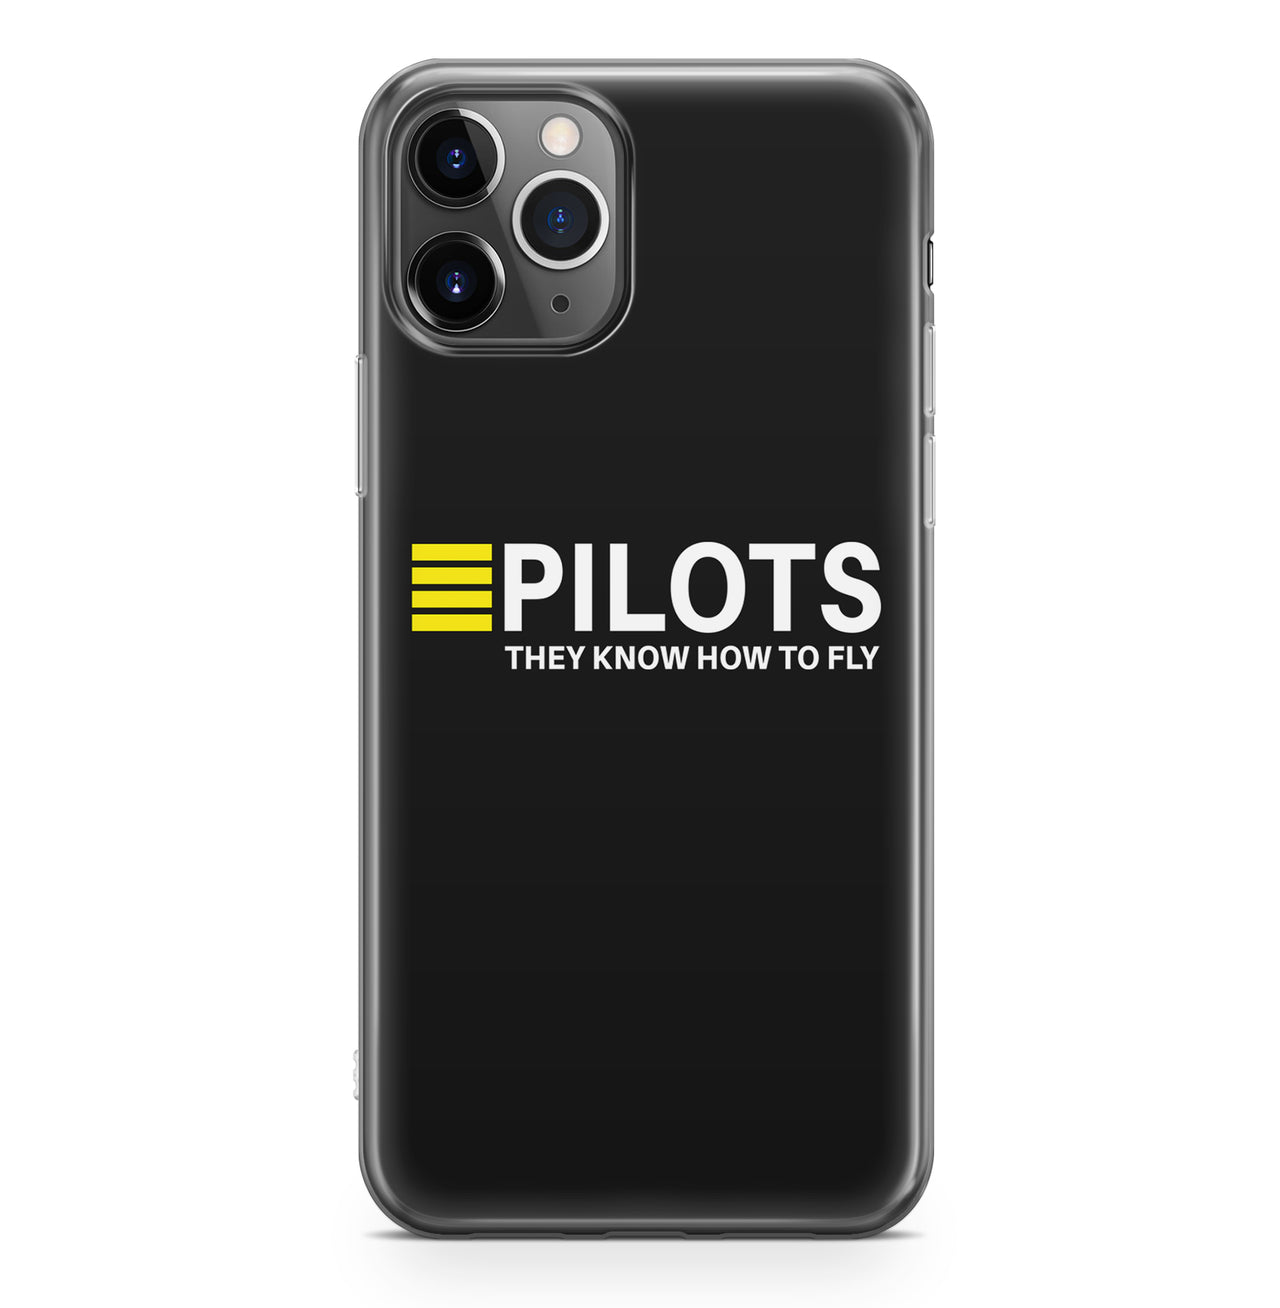 Pilots They Know How To Fly Designed iPhone Cases